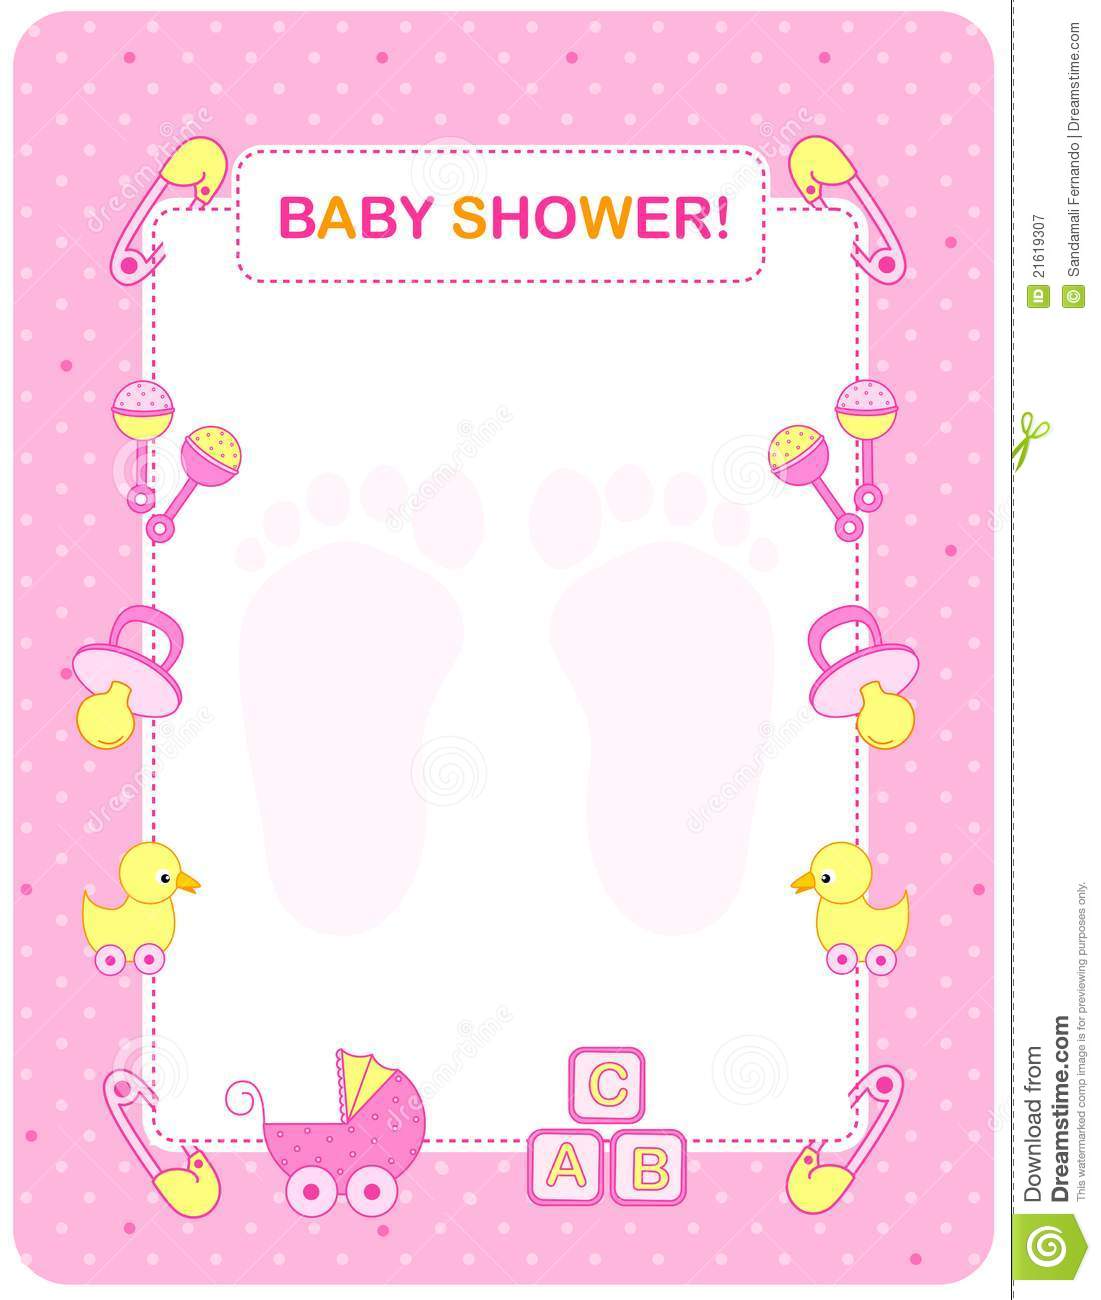 Full Size of Baby Shower:graceful Baby Shower Cards Image Designs Baby Shower Greetings Elegant Baby Shower Baby Shower Diaper Raffle What Is A Baby Shower Baby Shower Essentials